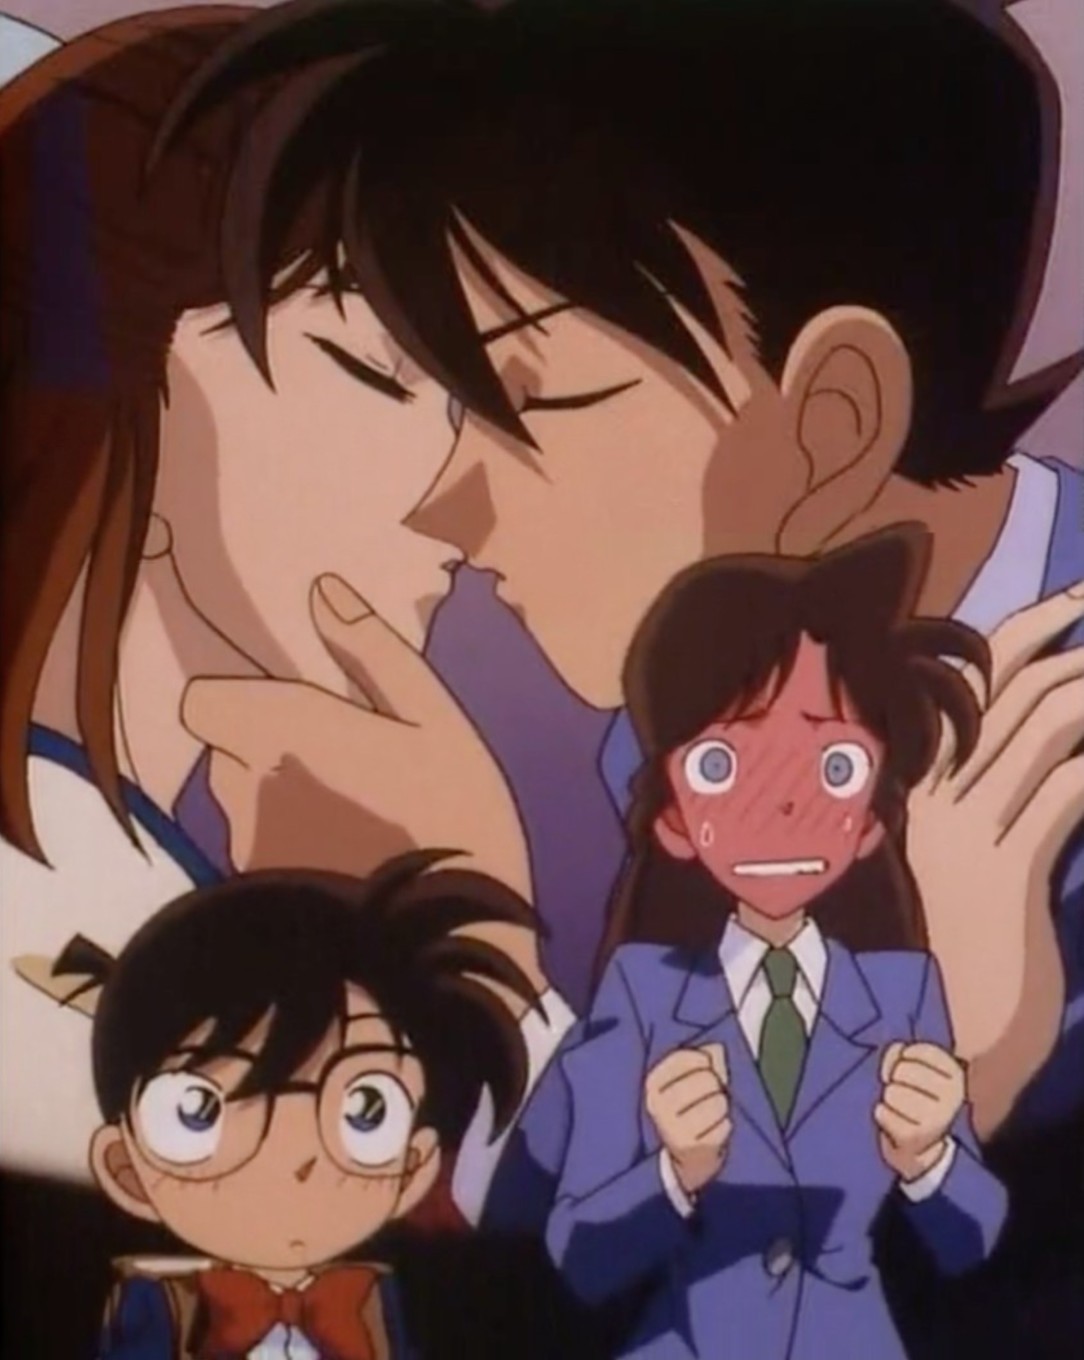 Love is Real — Conan and Ran shocked by Shinichi's secret...